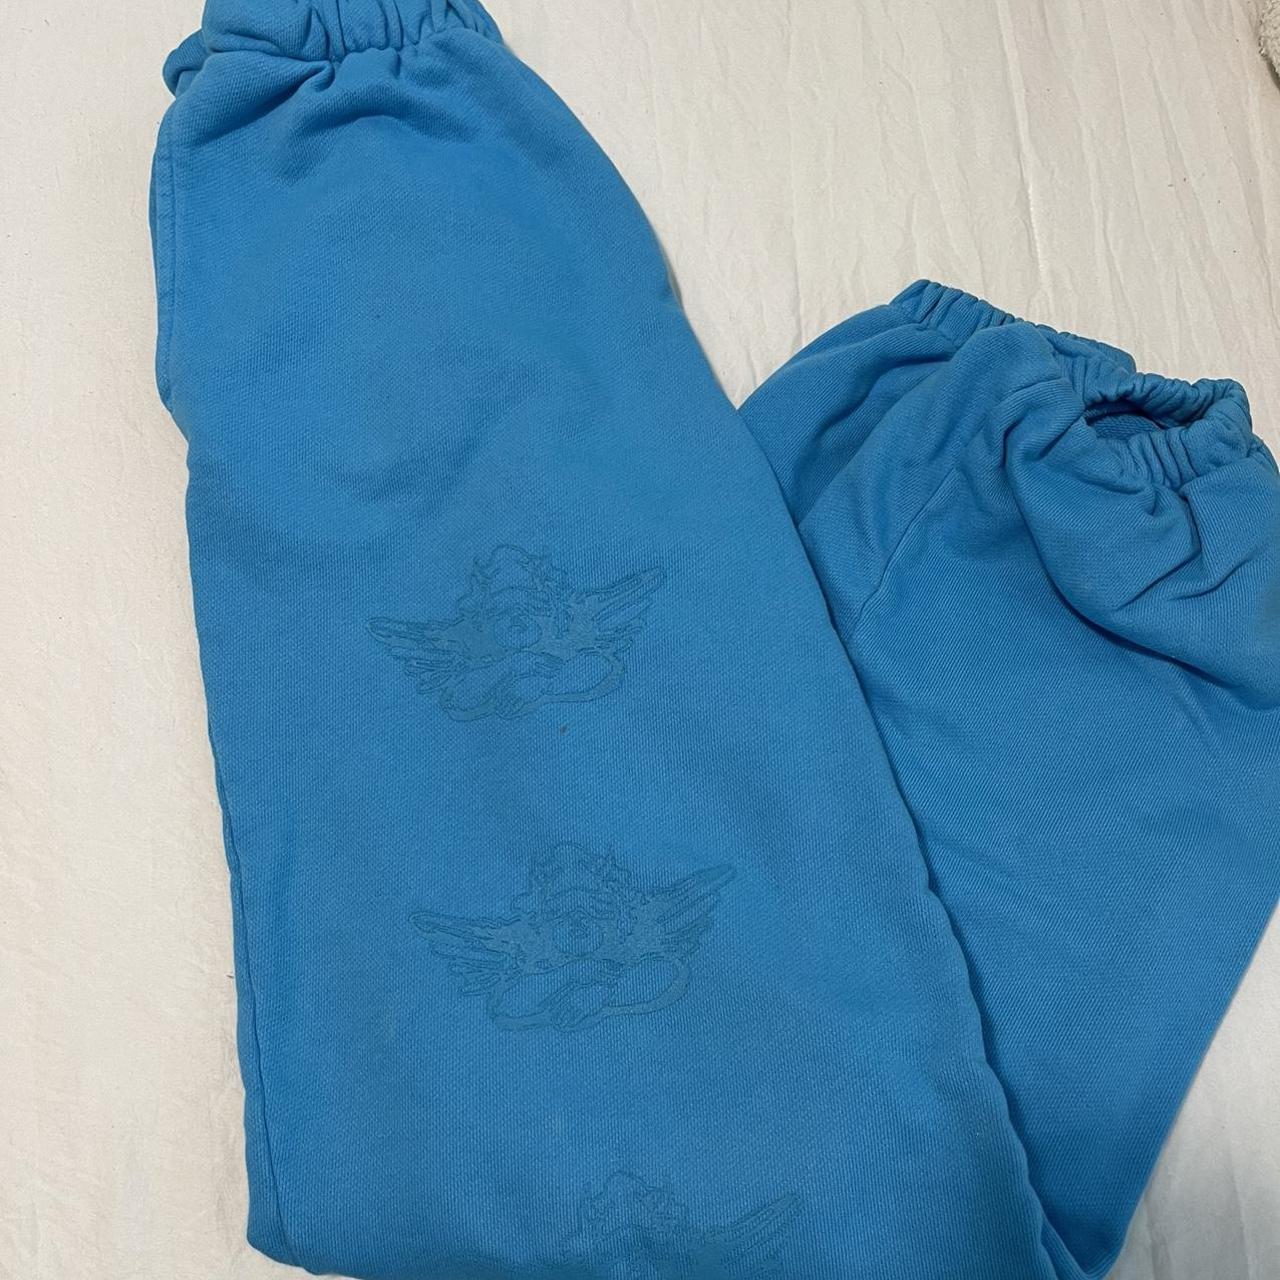 Madhappy Women's Blue Joggers-tracksuits | Depop